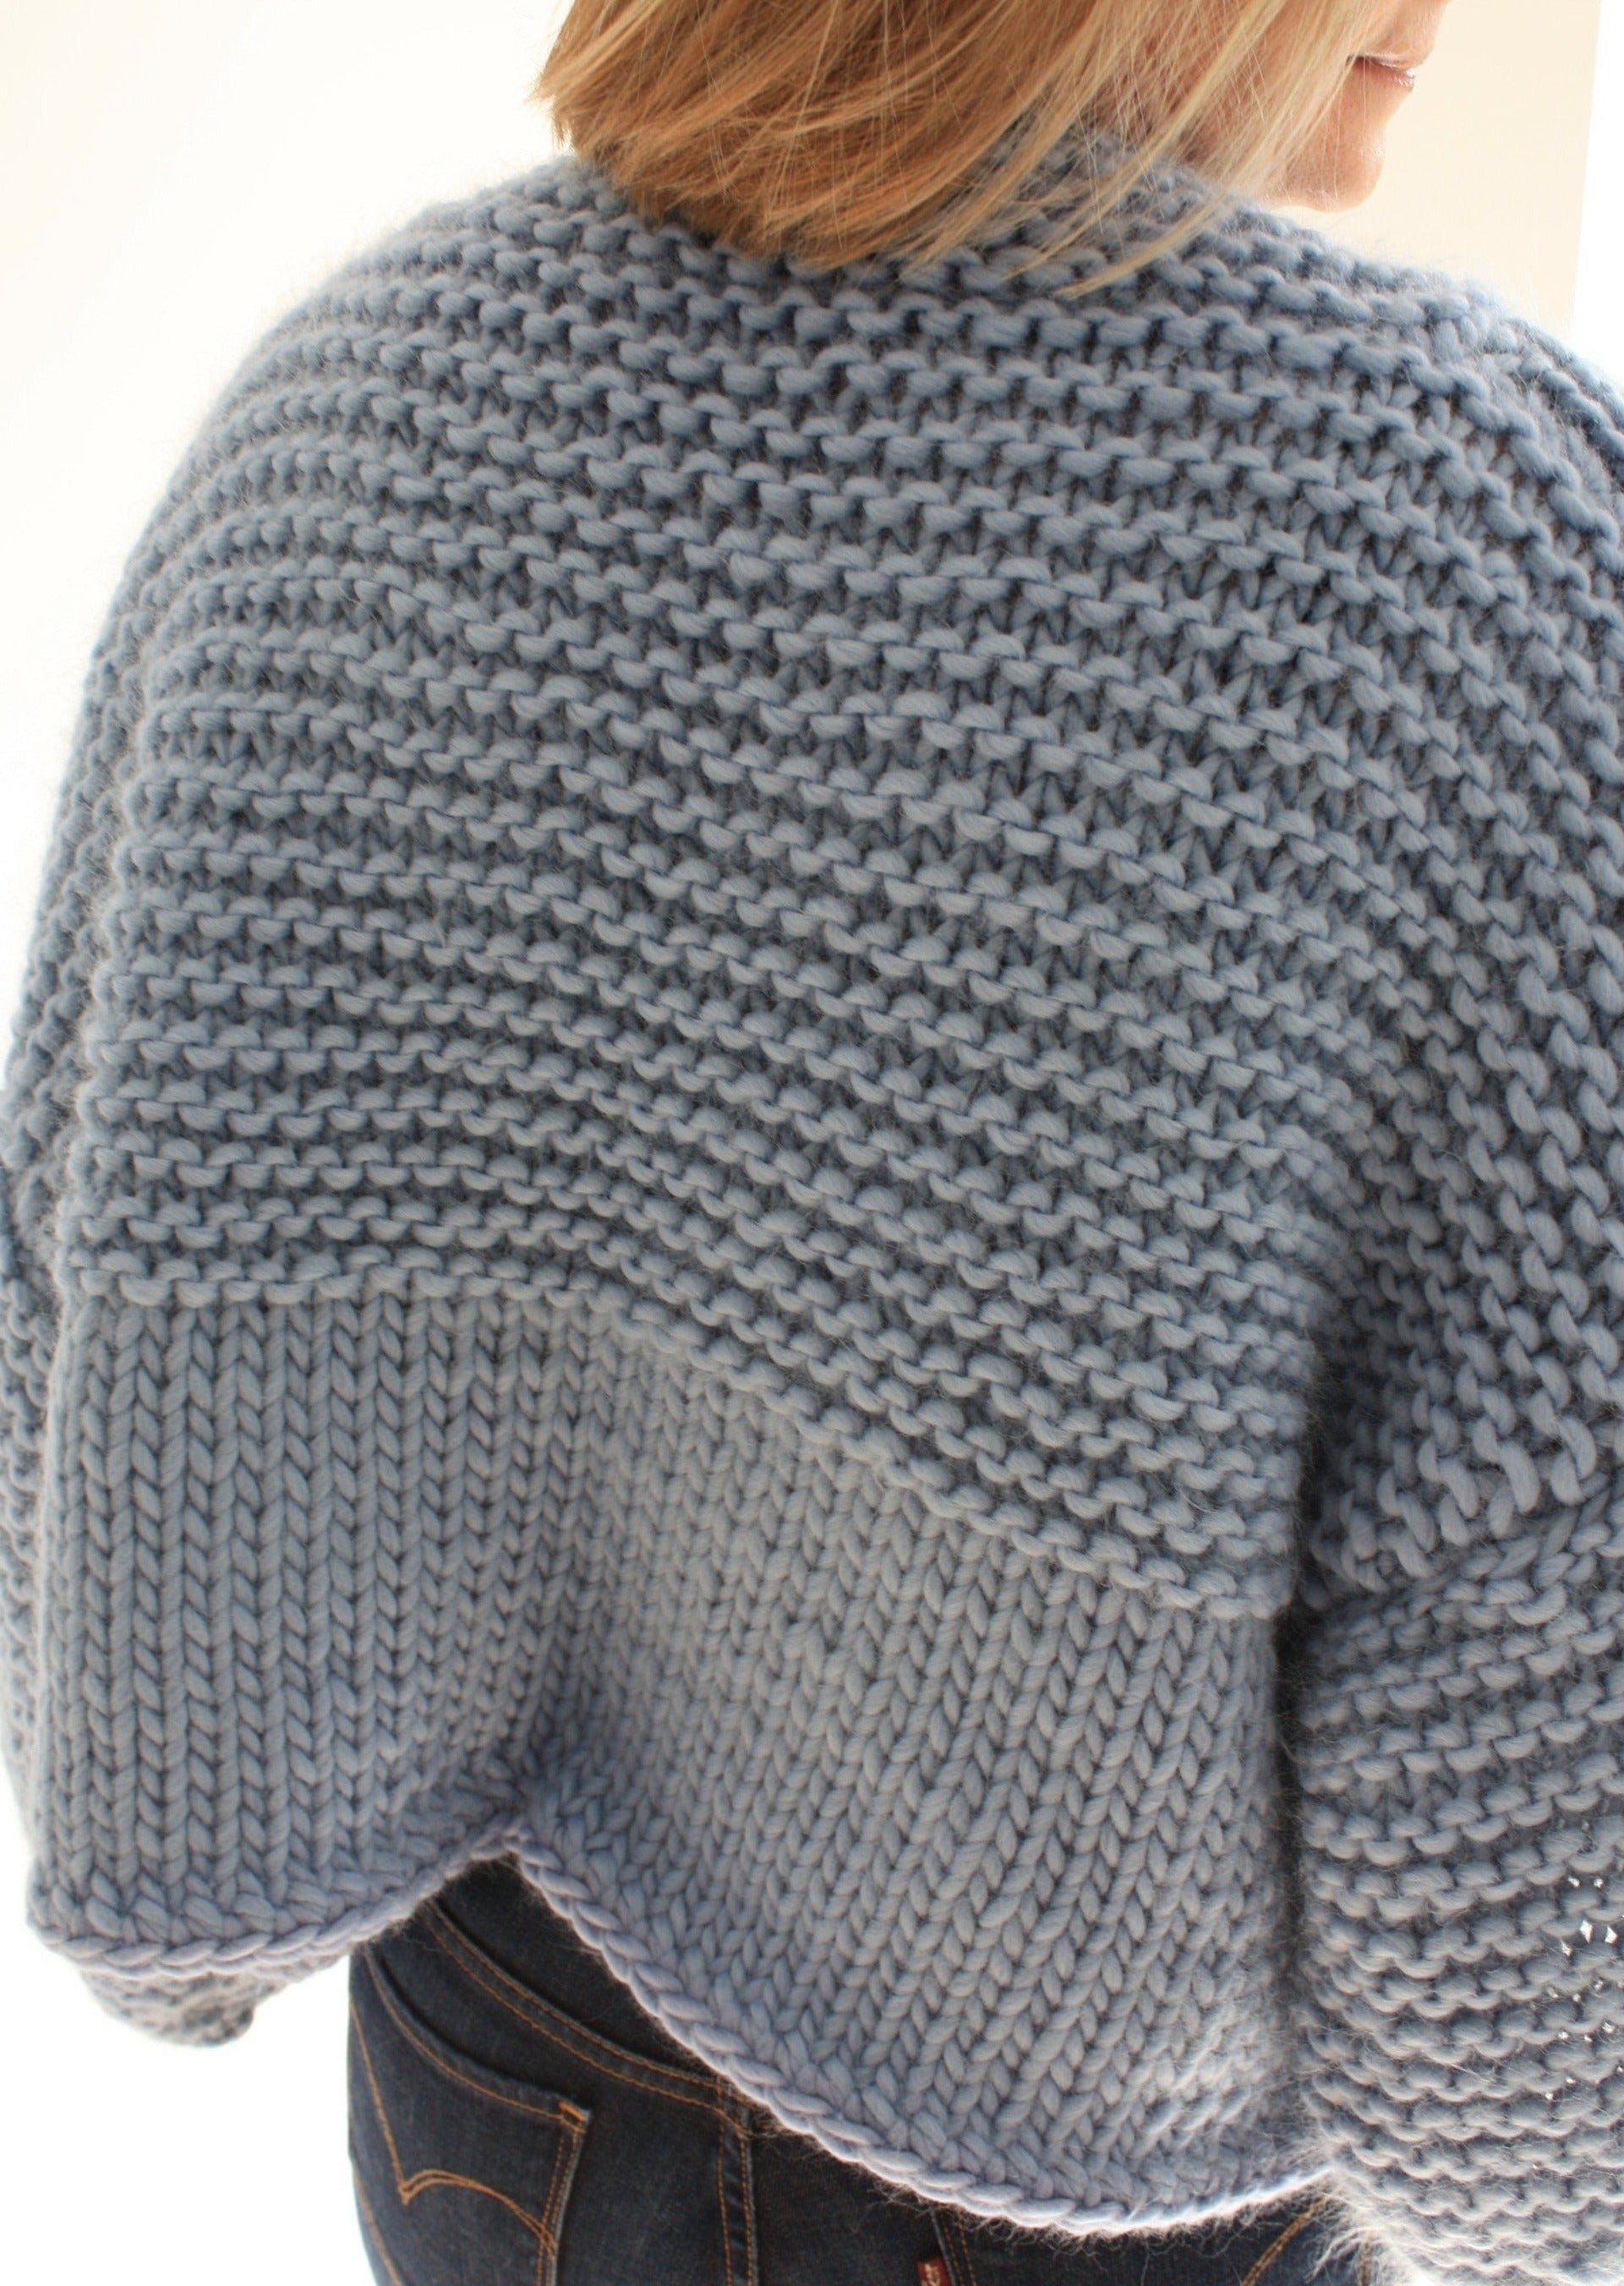 Knitting - Variation of Simplest Sweater, Page 2